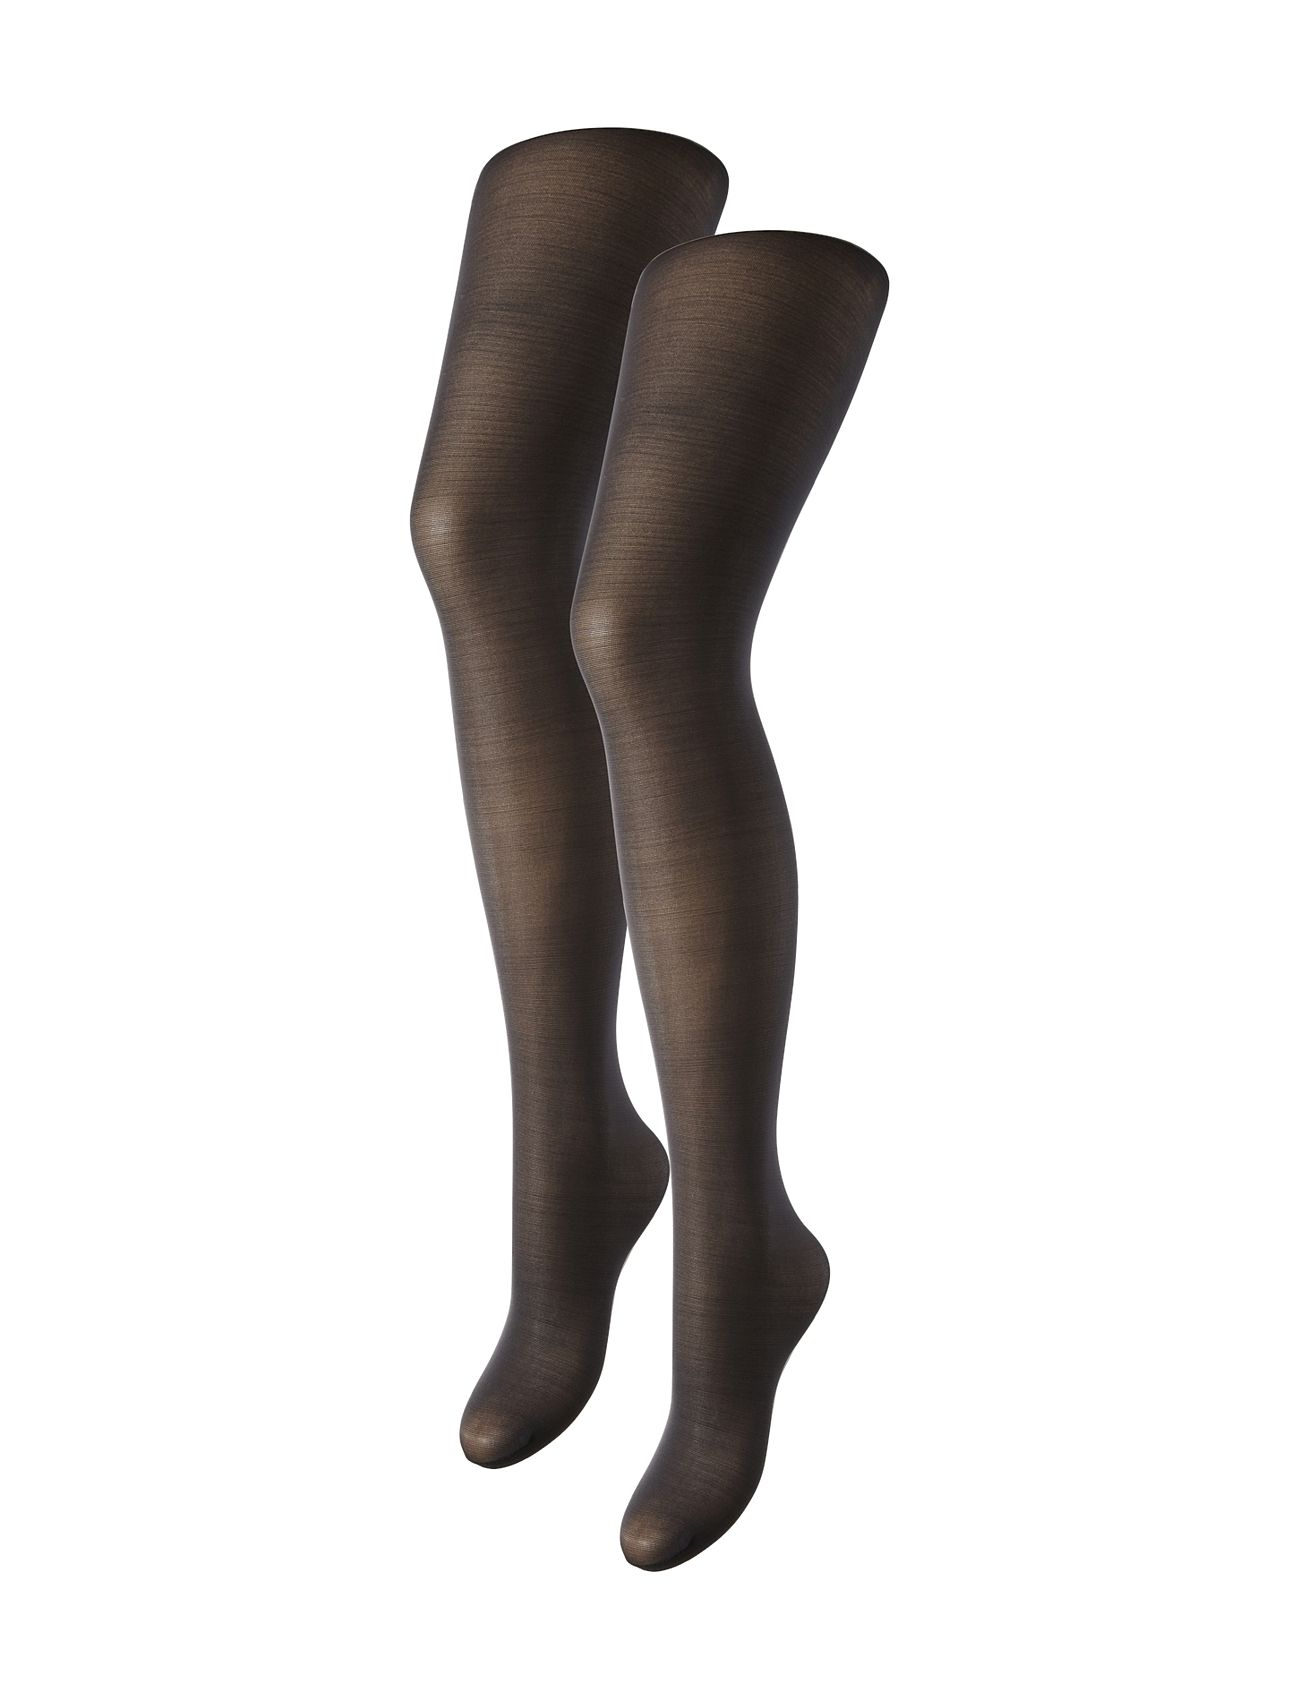 Pieces Pcnew Nikoline 20 Den Tights 2 - Pantyhose Pack